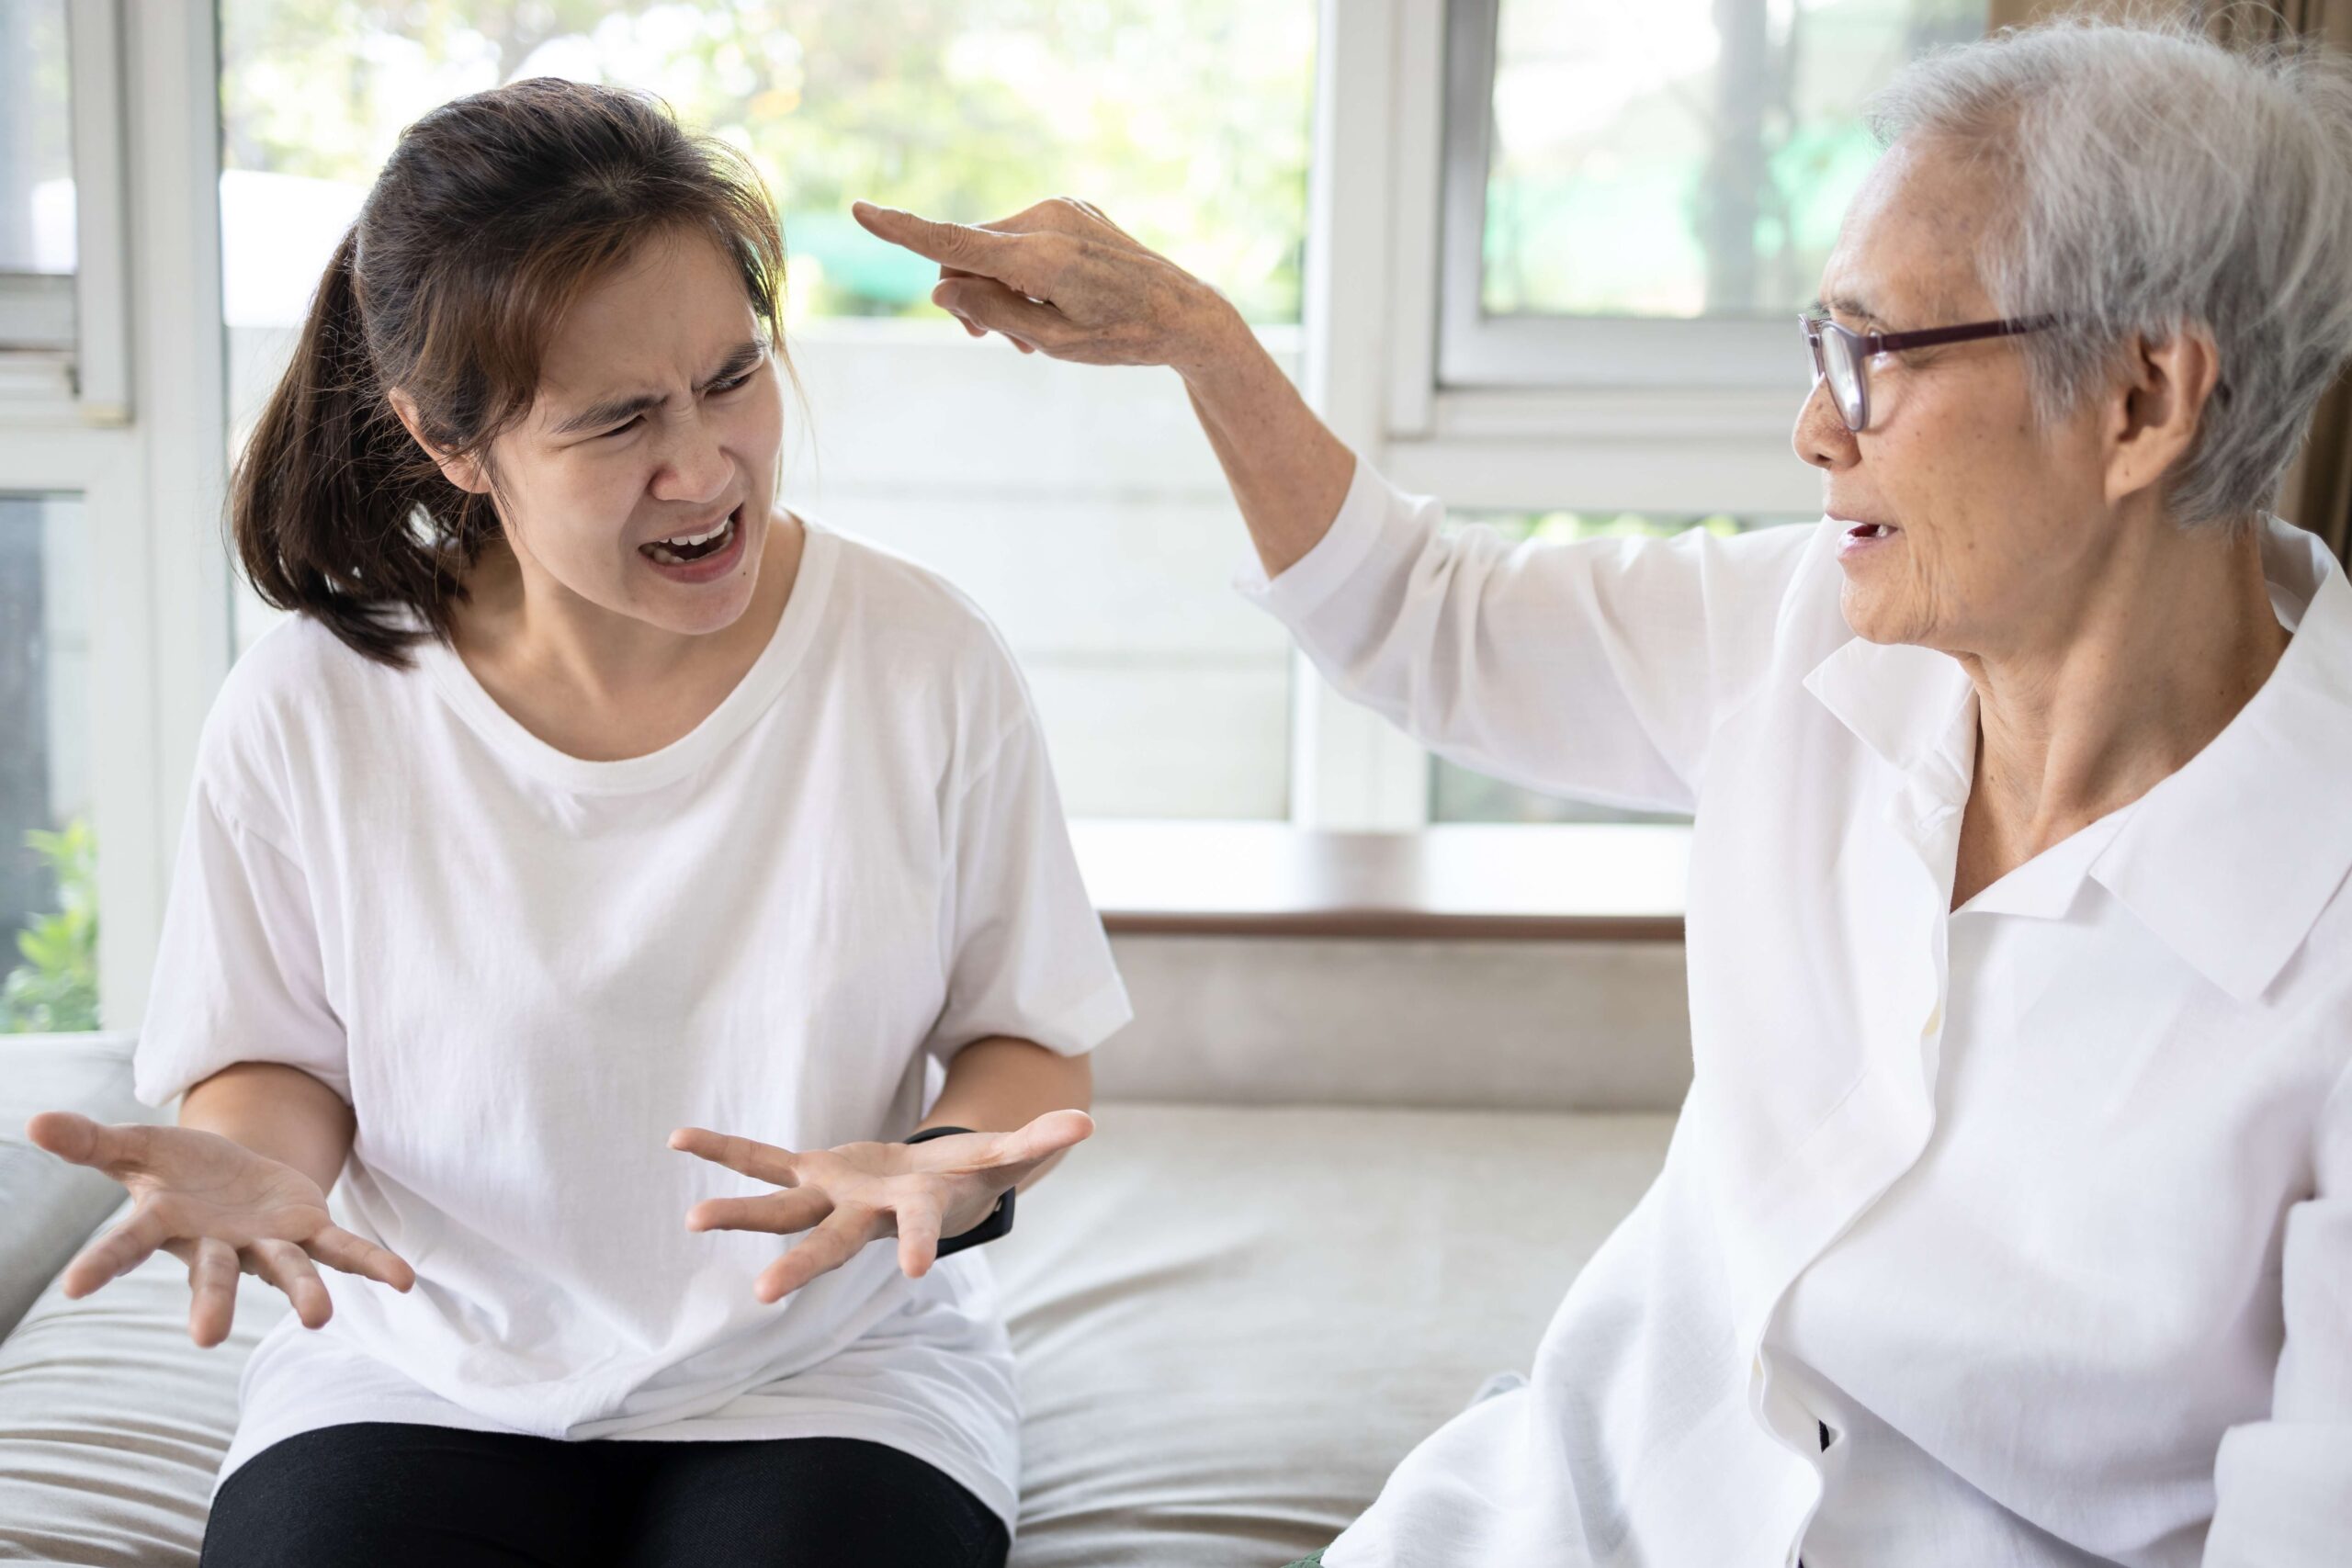 What are the misconceptions about a nursing home?